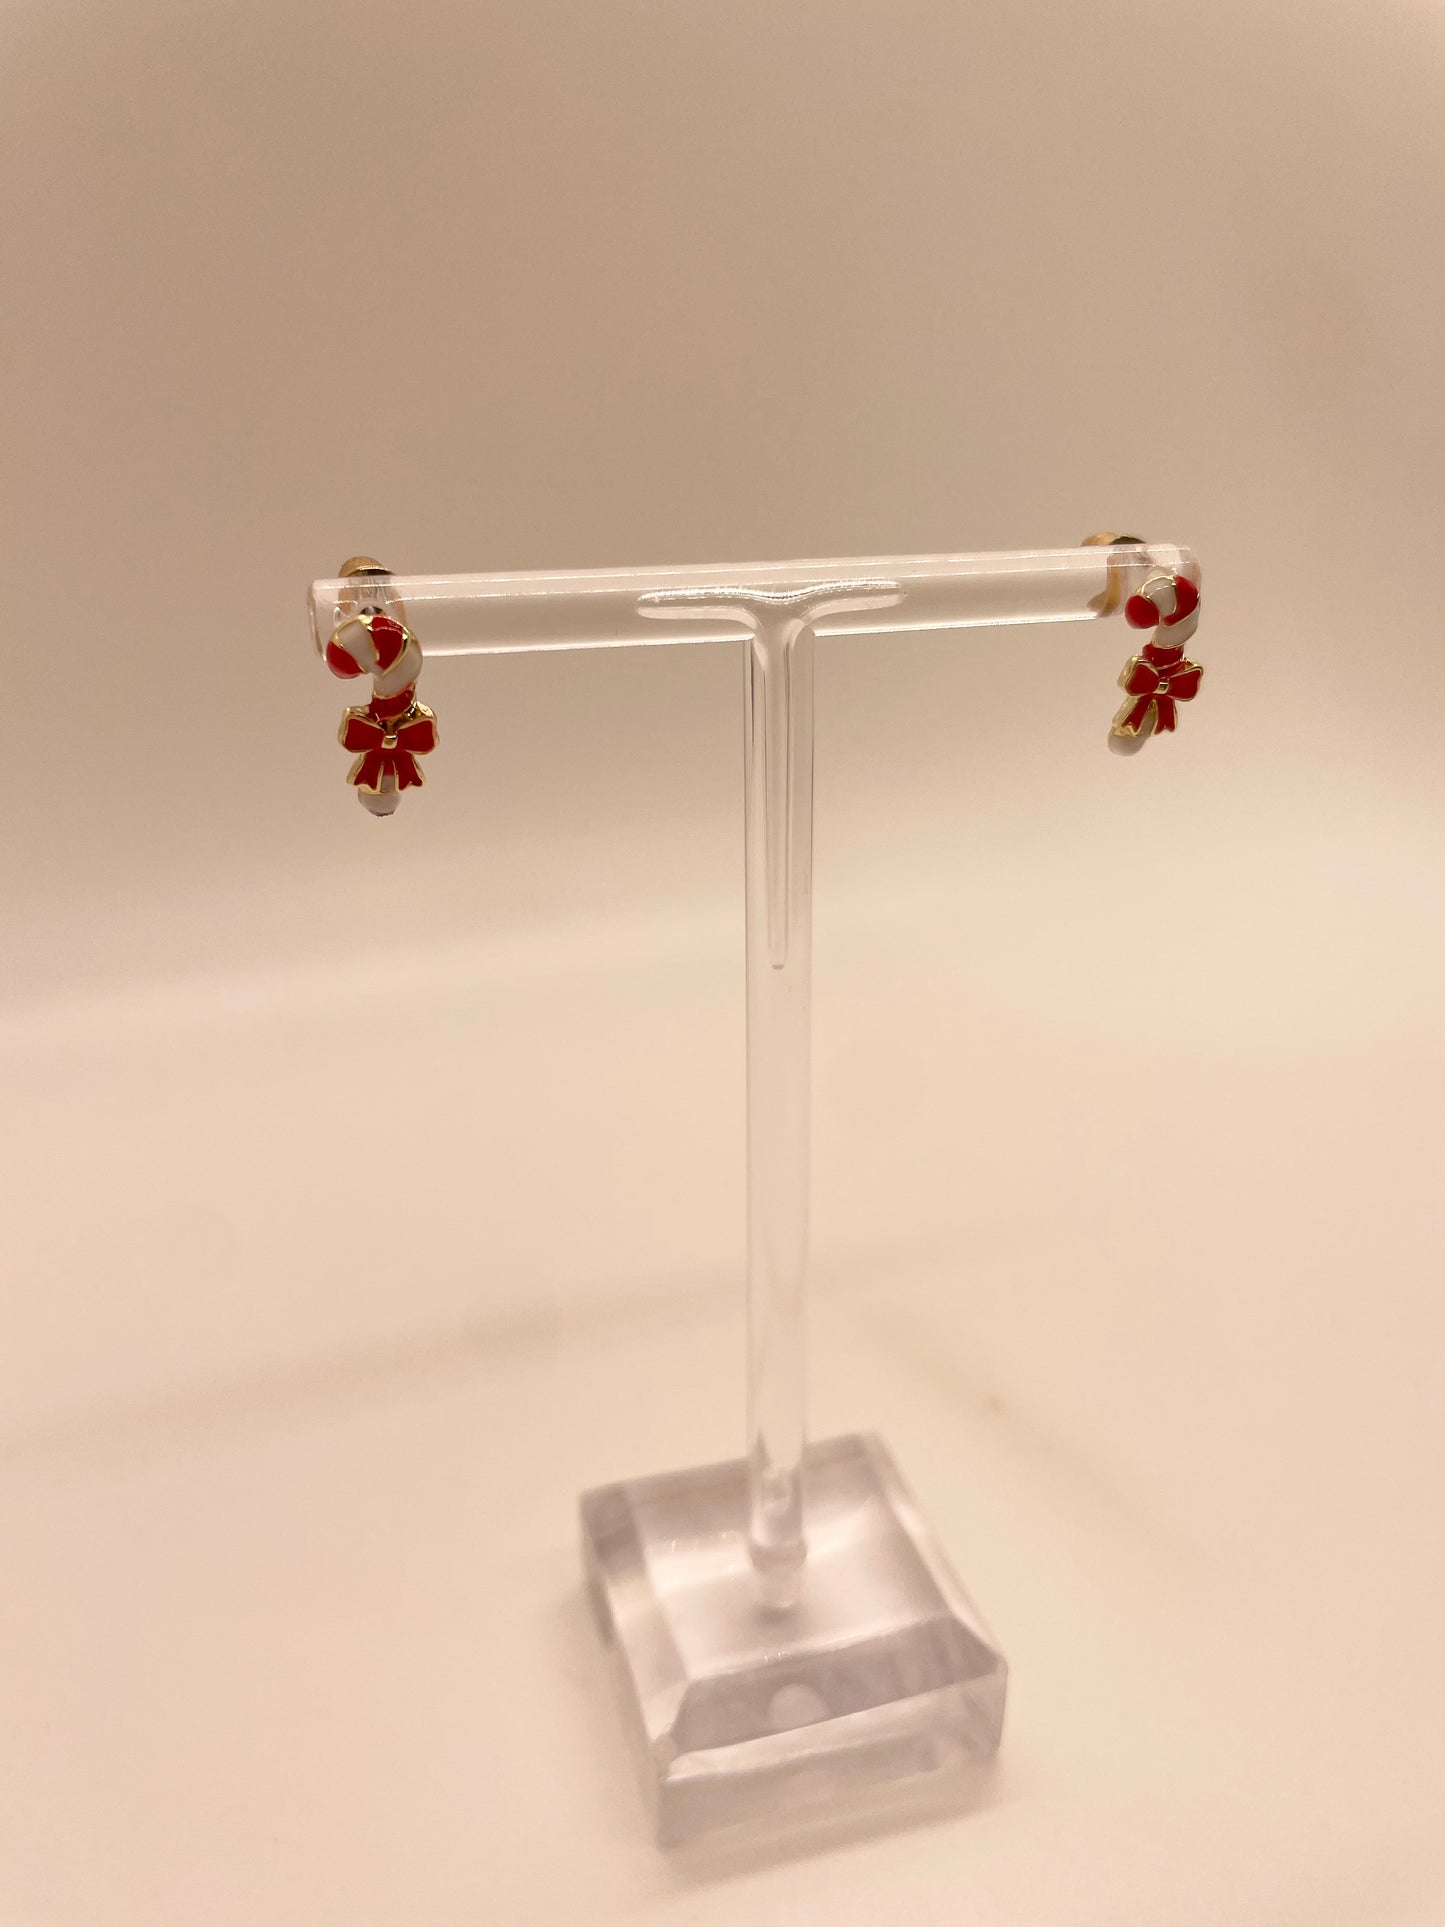 Laura Janelle Candy Canes with Bows Stud Earring